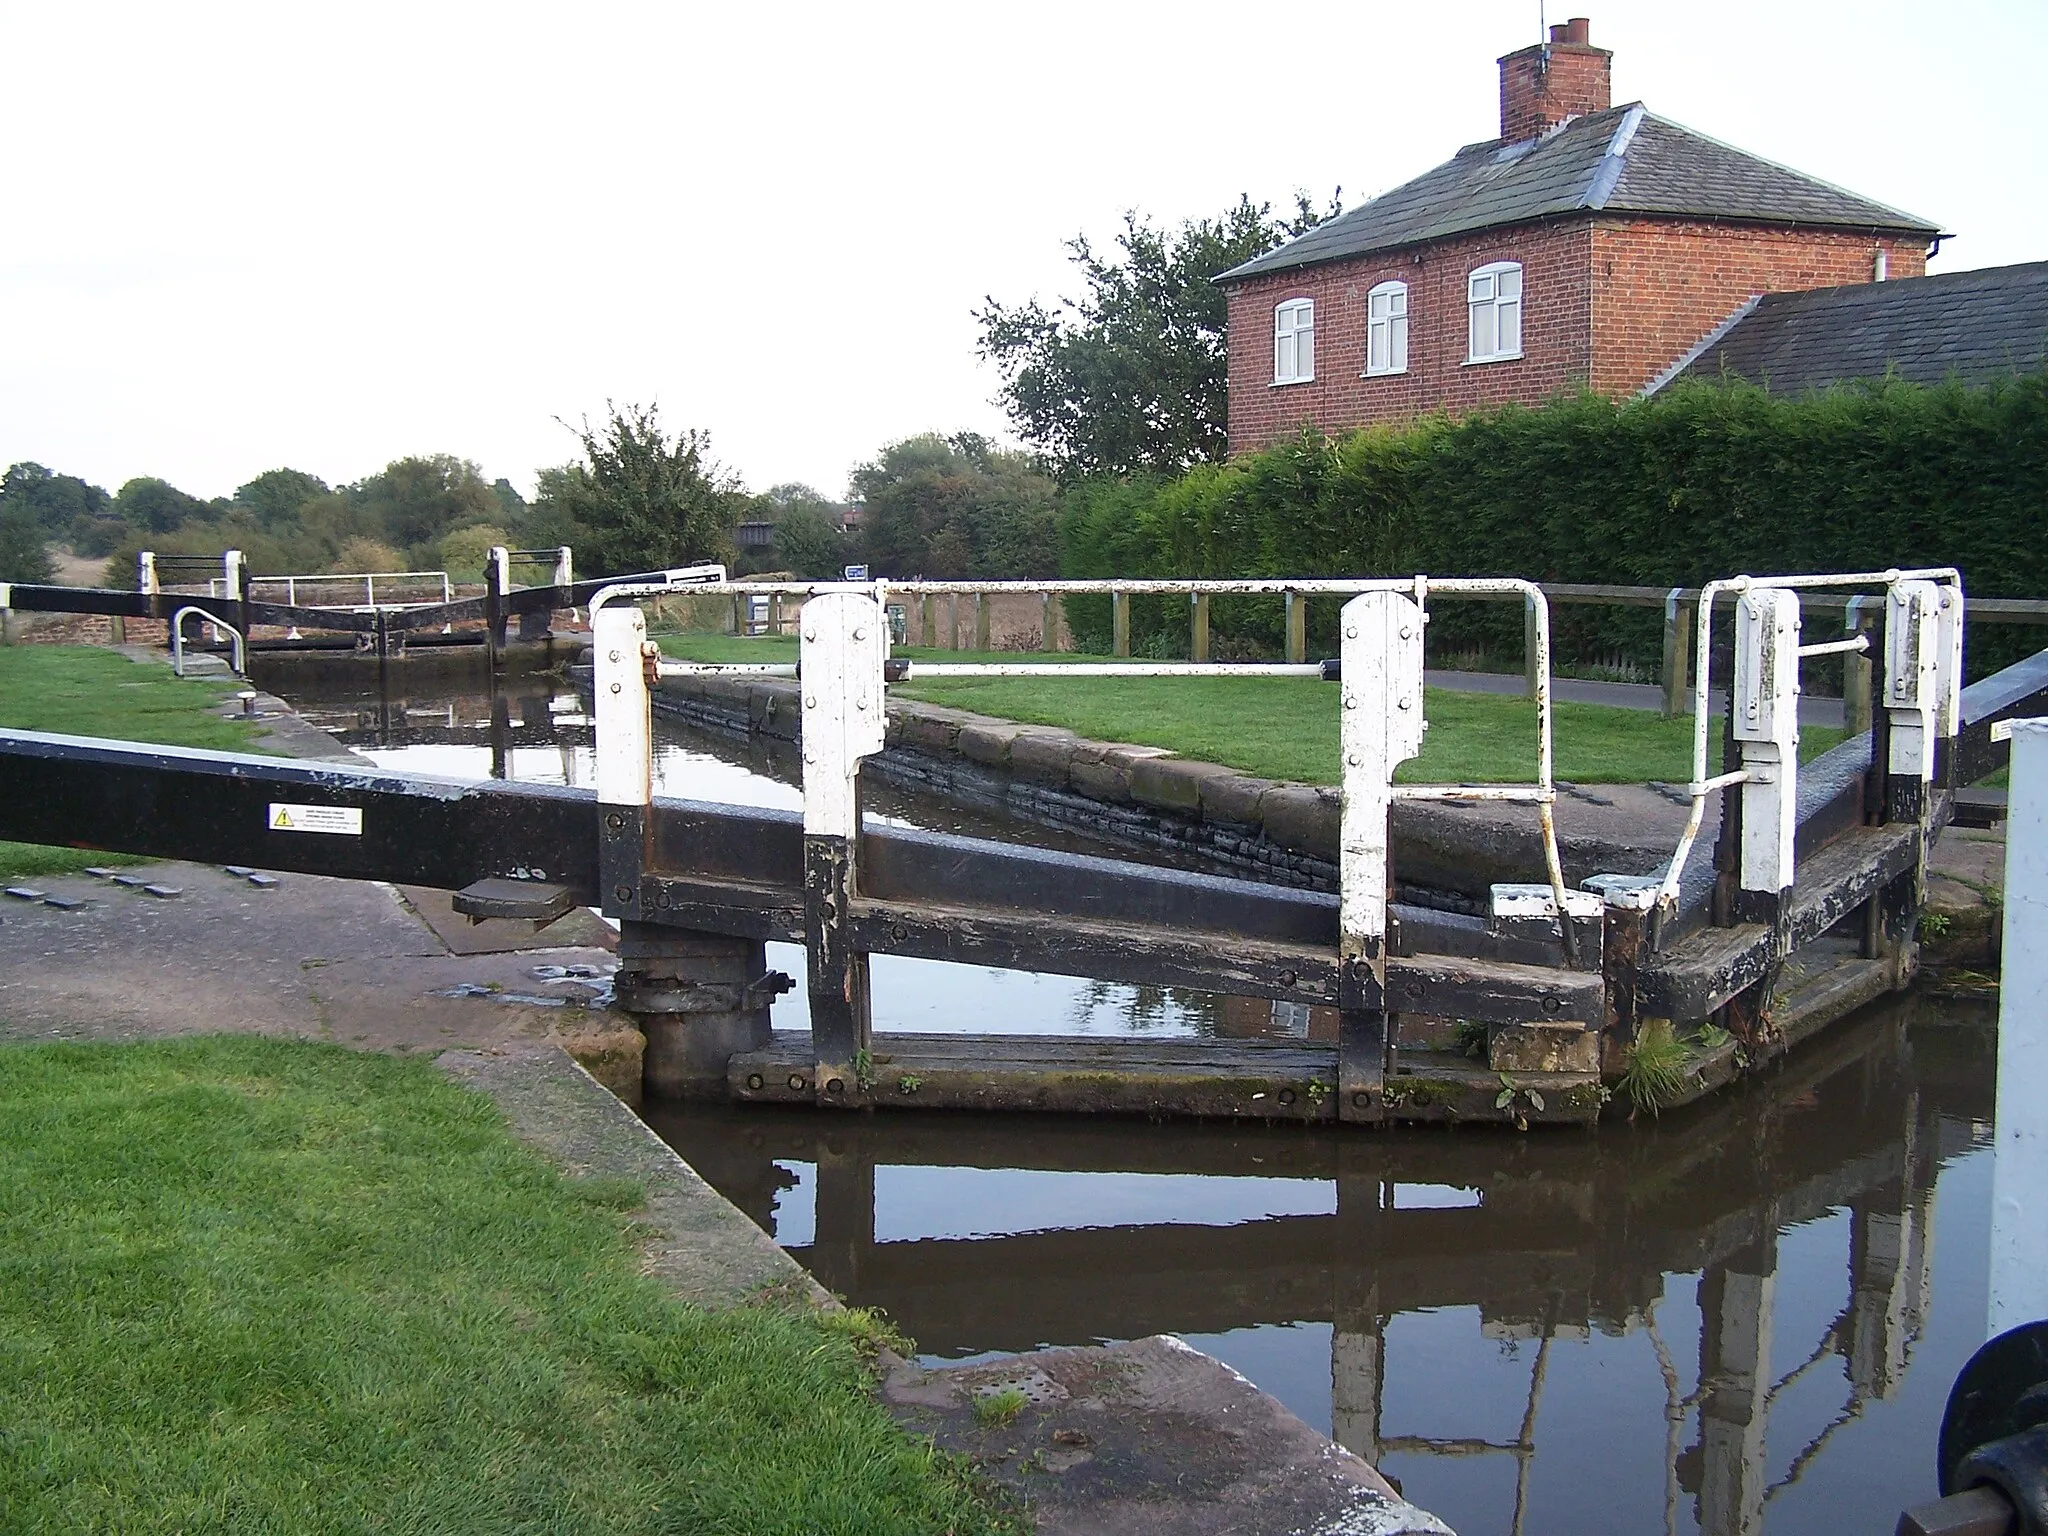 Photo showing: Swarkestone Lock and Lock keeper's cottage on the Trent and Mersey canal. The cottage housed a successful Team Room for 6 years and closed in 2001. The cottage still remains in private ownership and has been in the same family for 30 years. The lock is the third deepest on the Trent and Mersey.